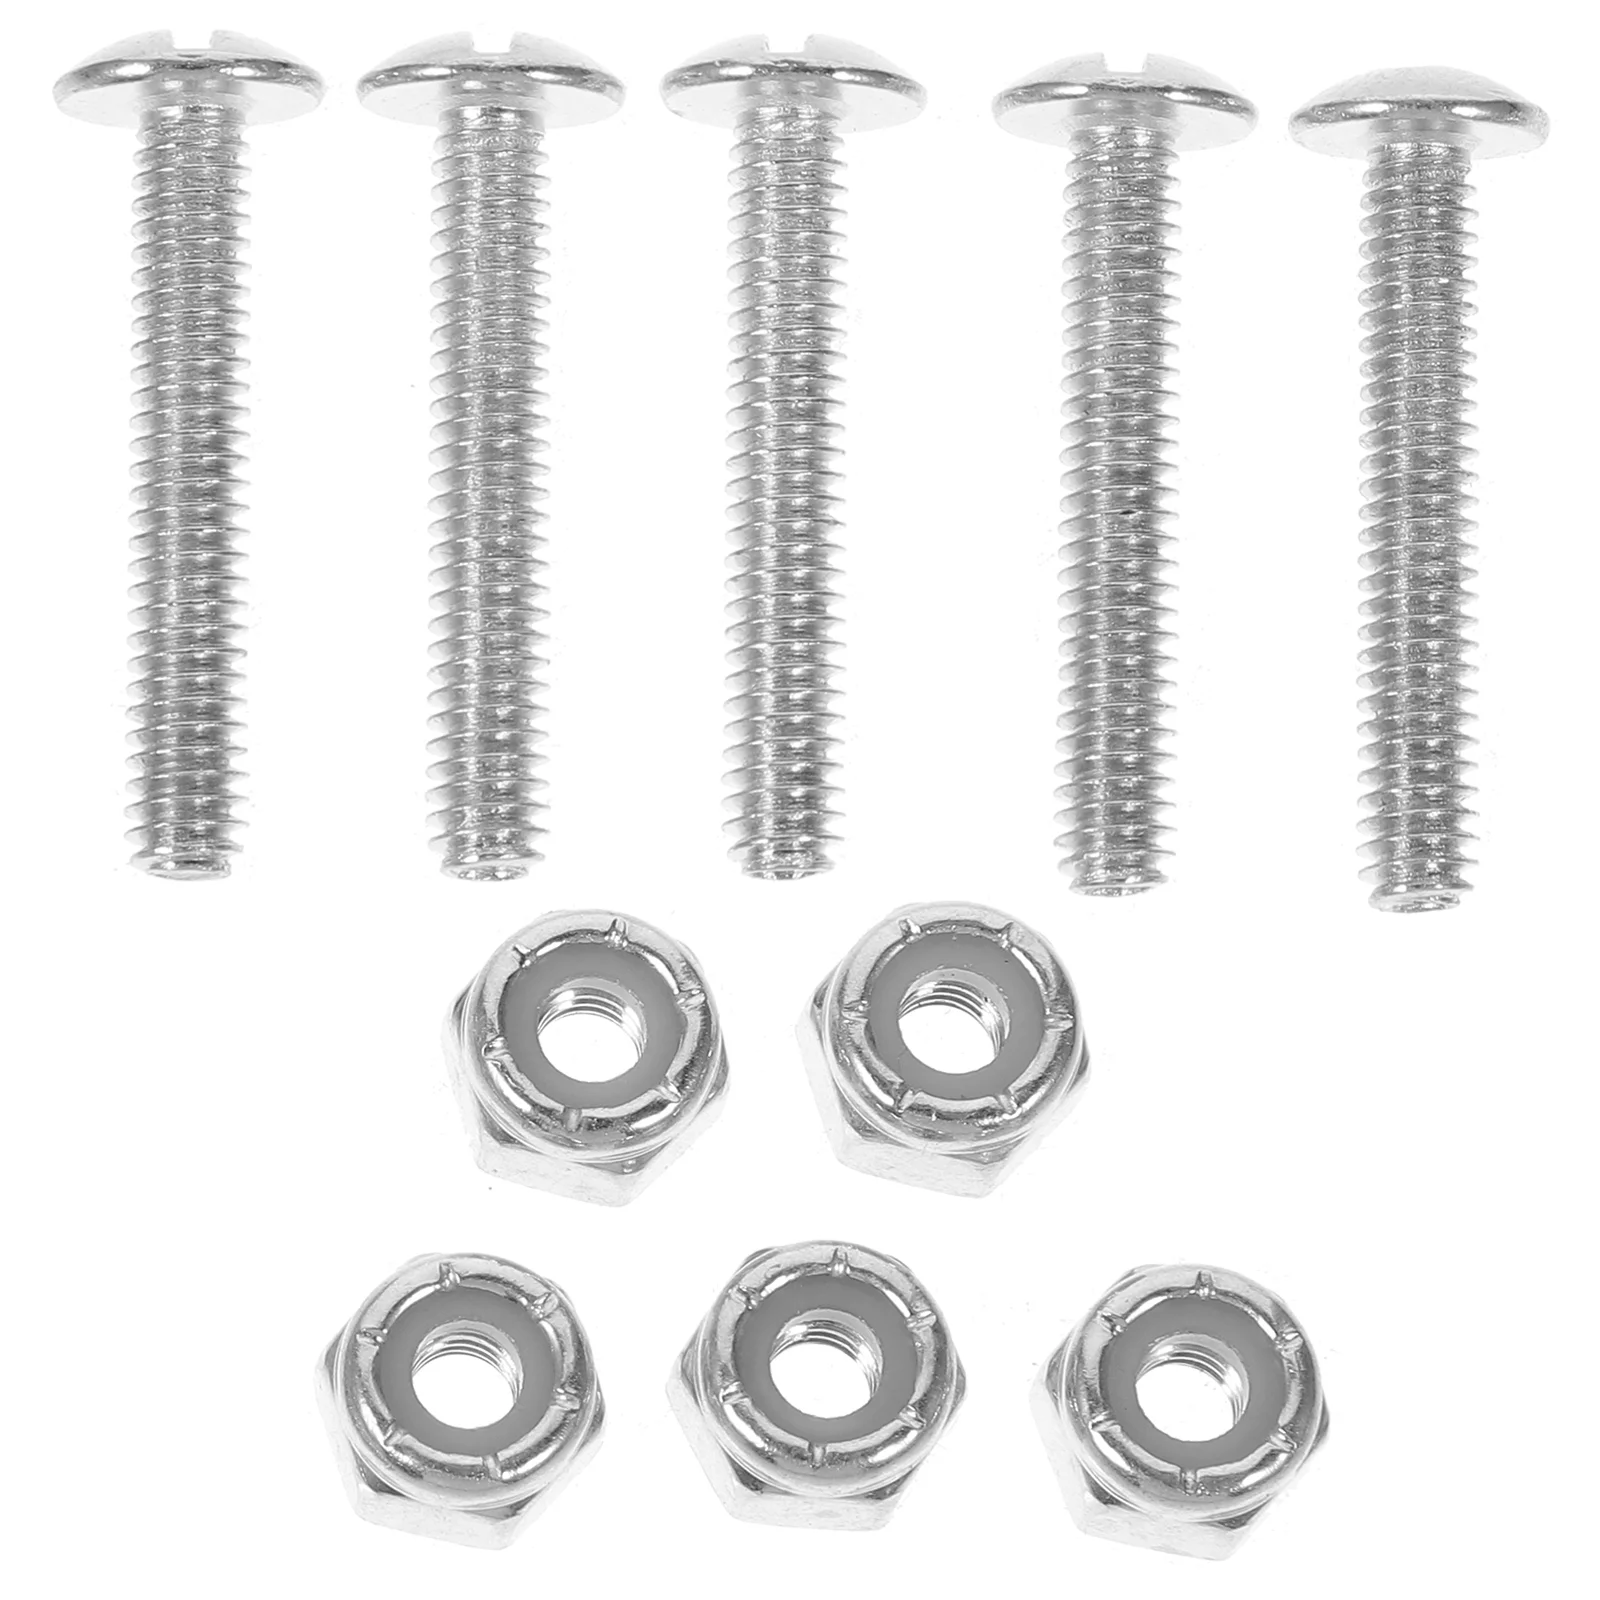 12 Pcs Table Football Screws Foosball Replacement Parts Nut Soccer Hardware Machine Nuts Galvanized Iron Accessories standard foosball table part screws